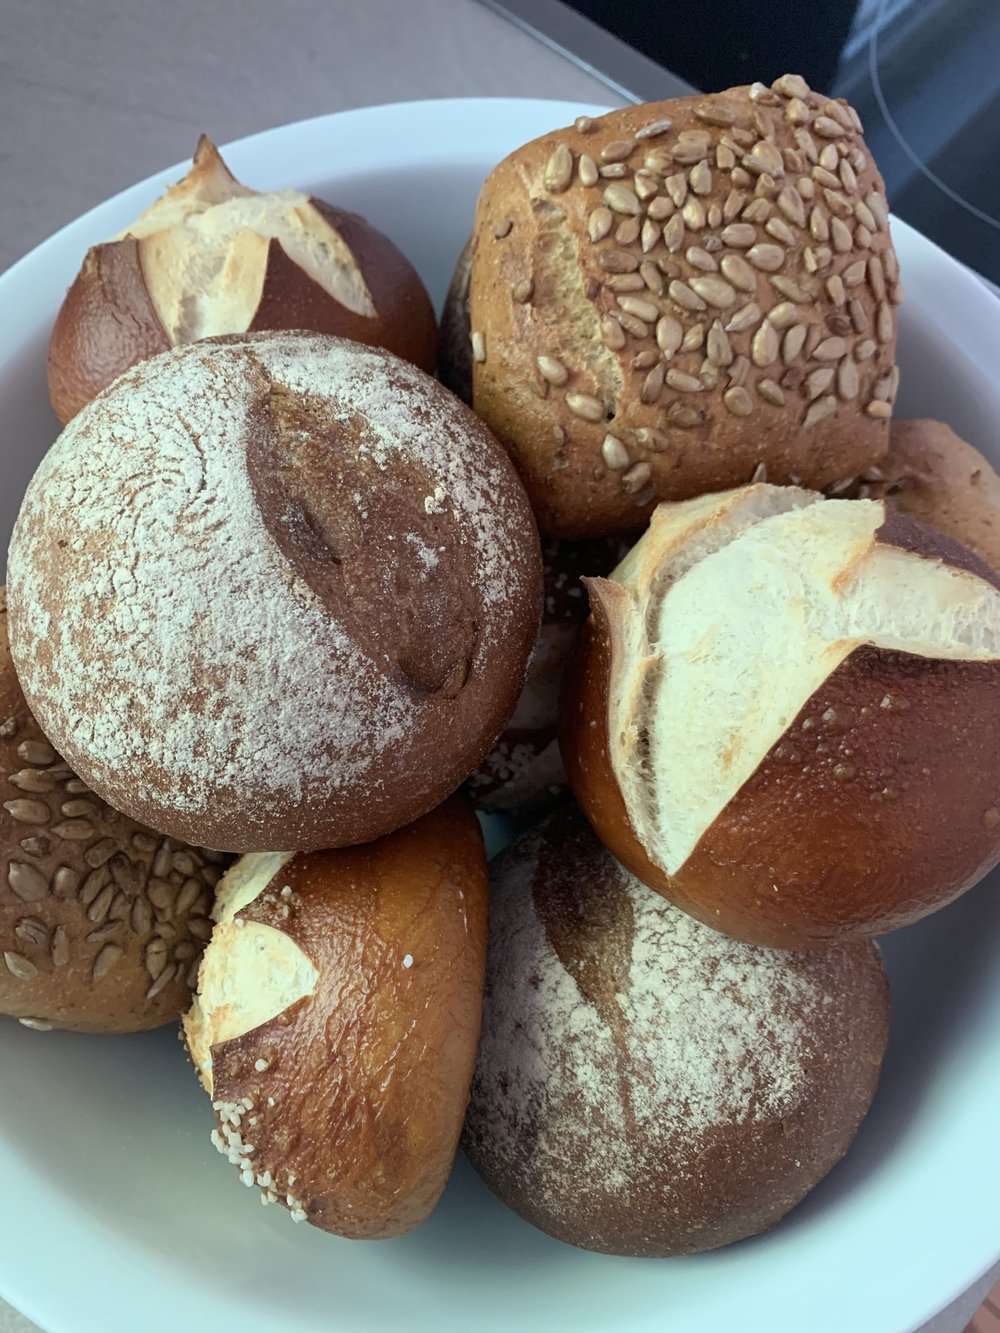 I thank God that I am not gluten intolerant. I mean, I can’t even with the rolls in Germany! I walked to the bakery every couple days to get fresh rolls.